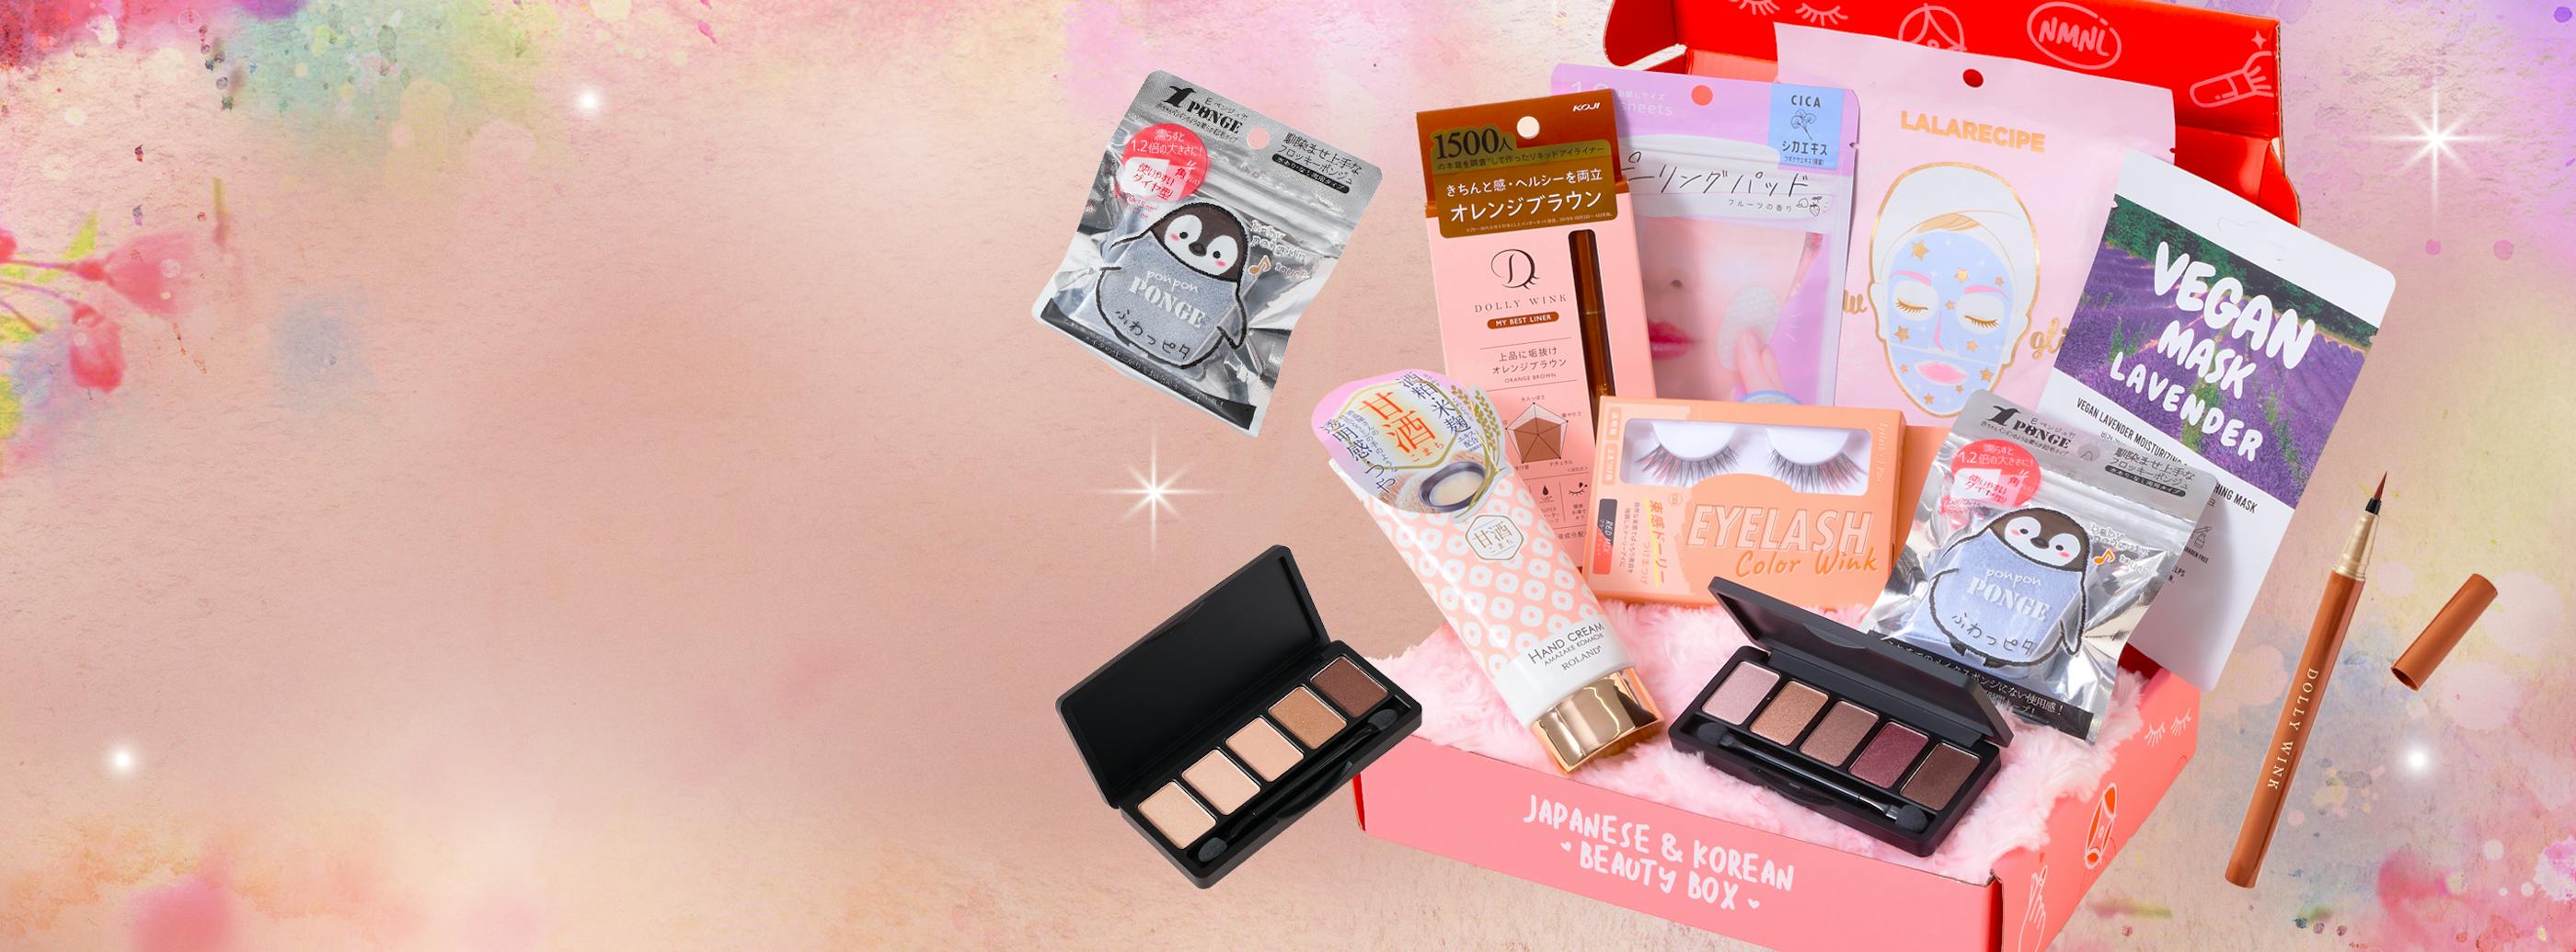 Sign up by April 15th for eight Japanese & Korean products in your Full Bloom Beauty box.